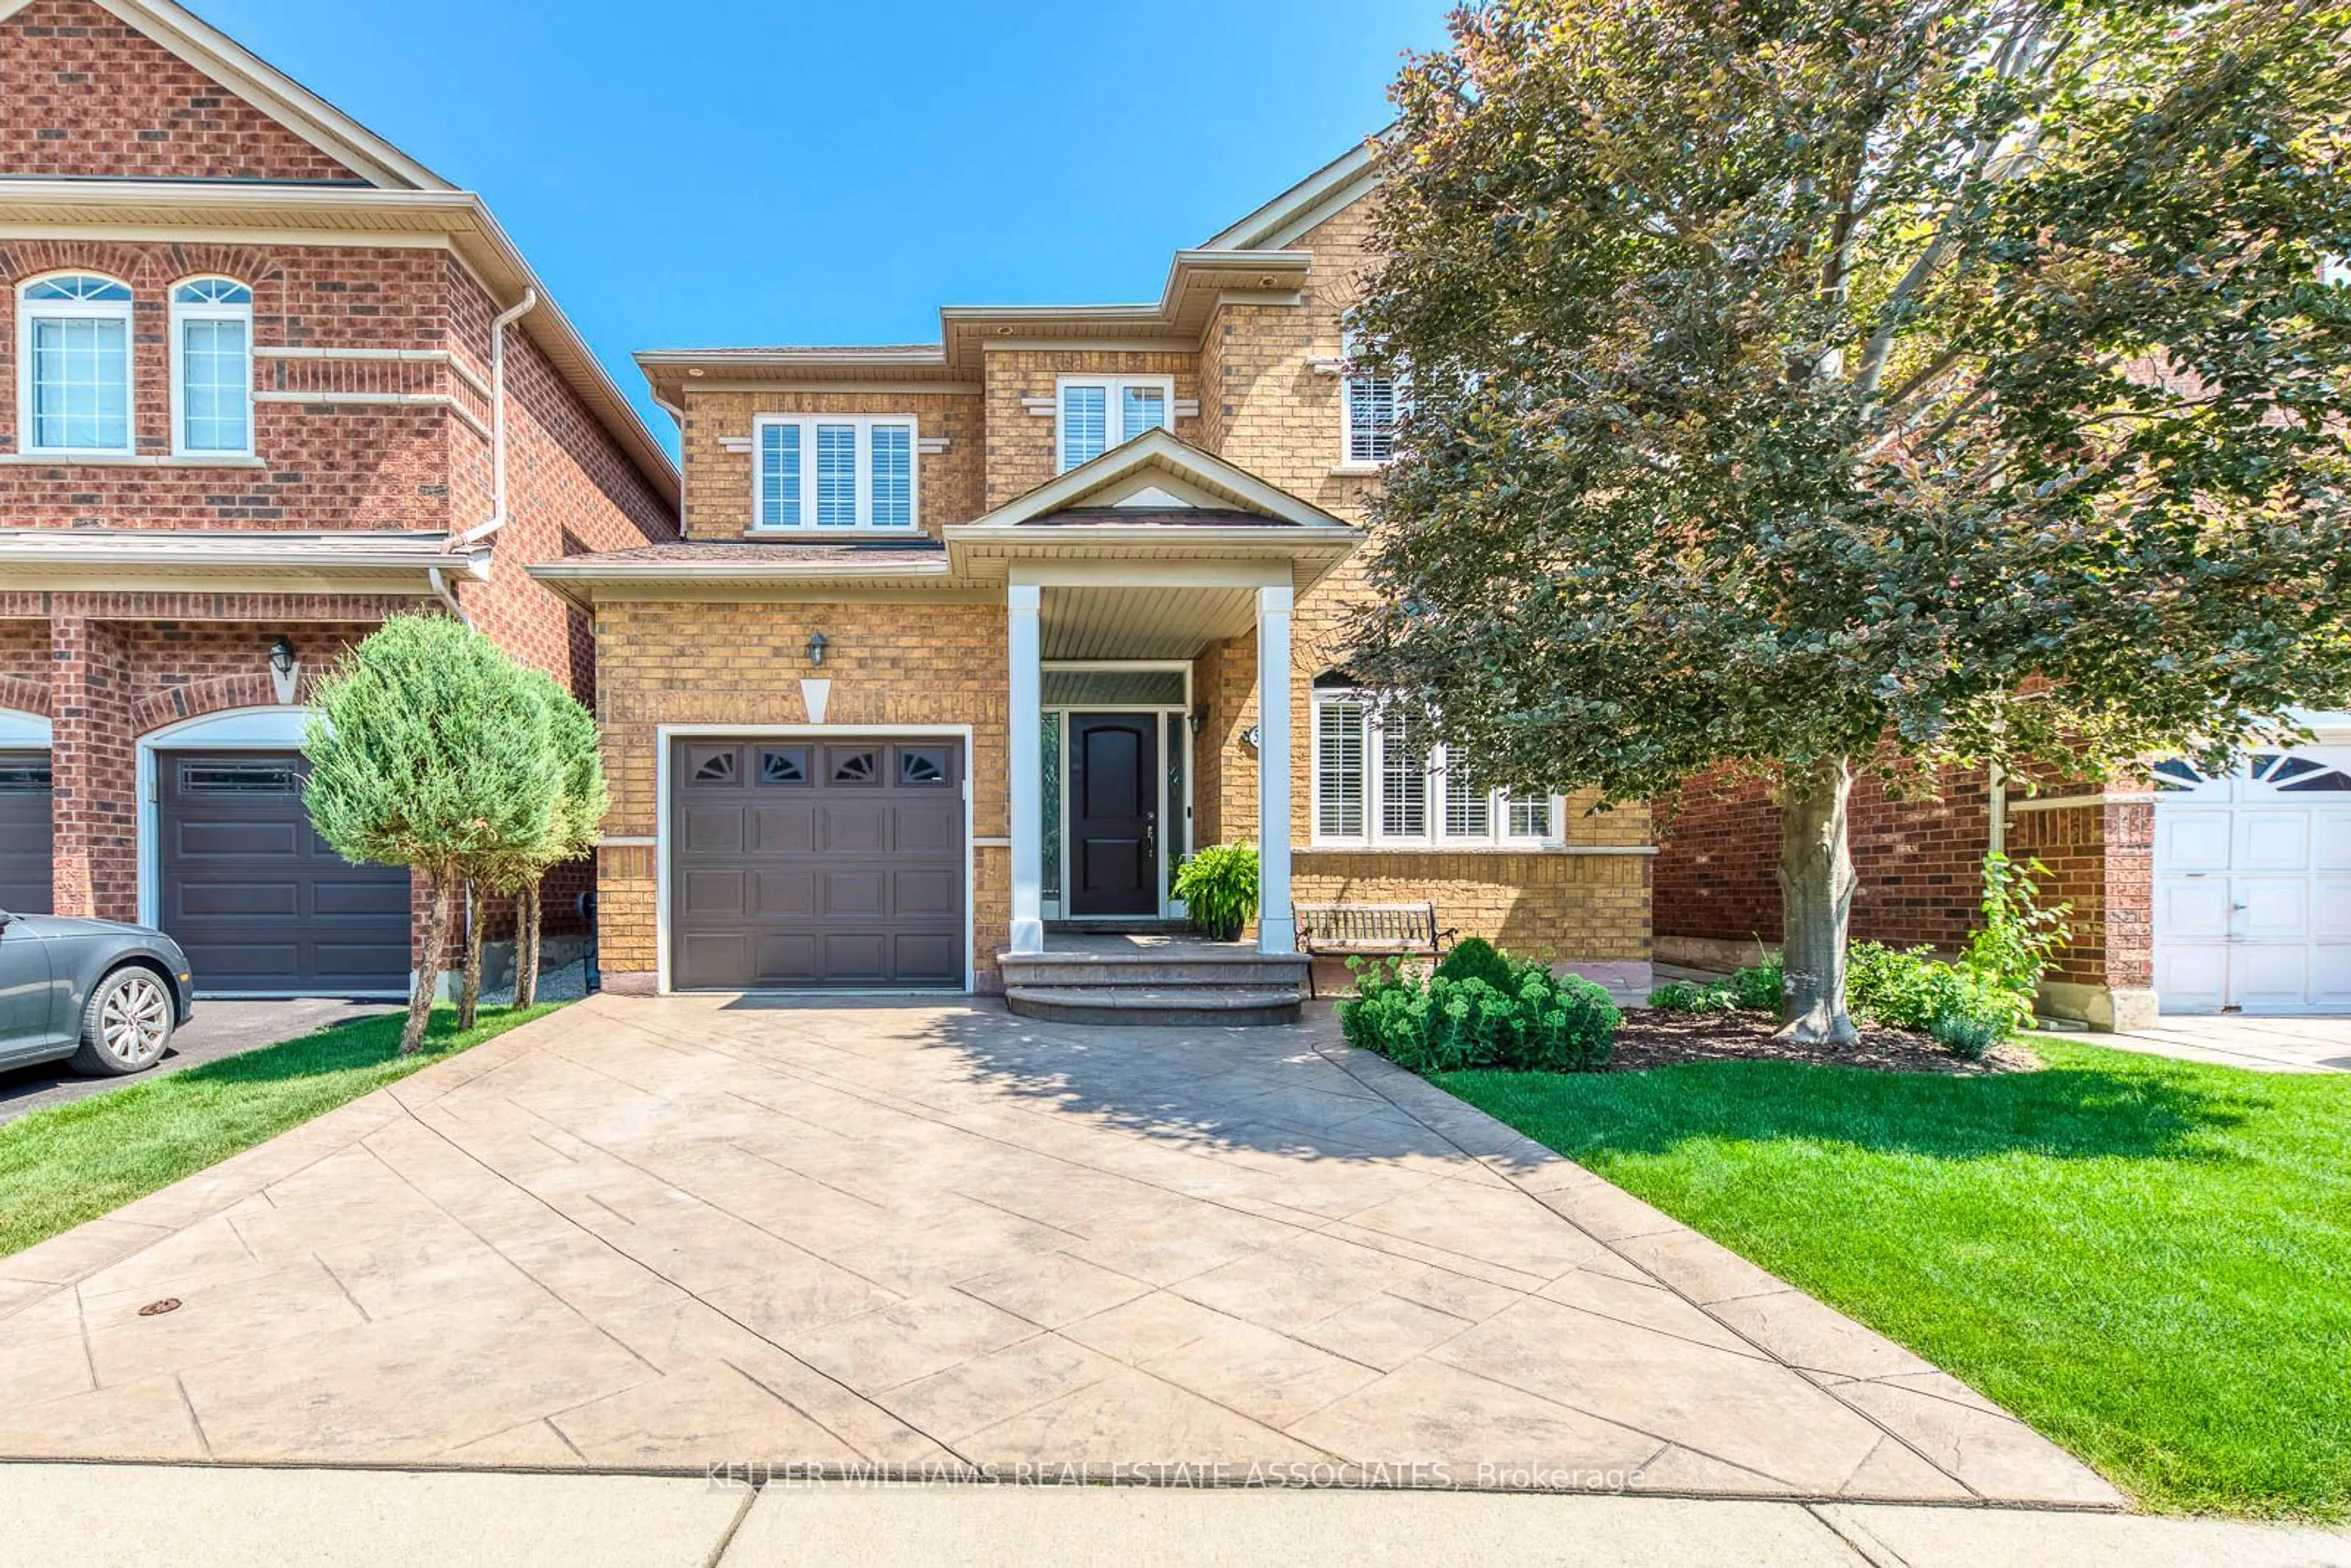 Home with brick exterior material for 5621 Watersfield Ave, Mississauga Ontario L5M 7E9